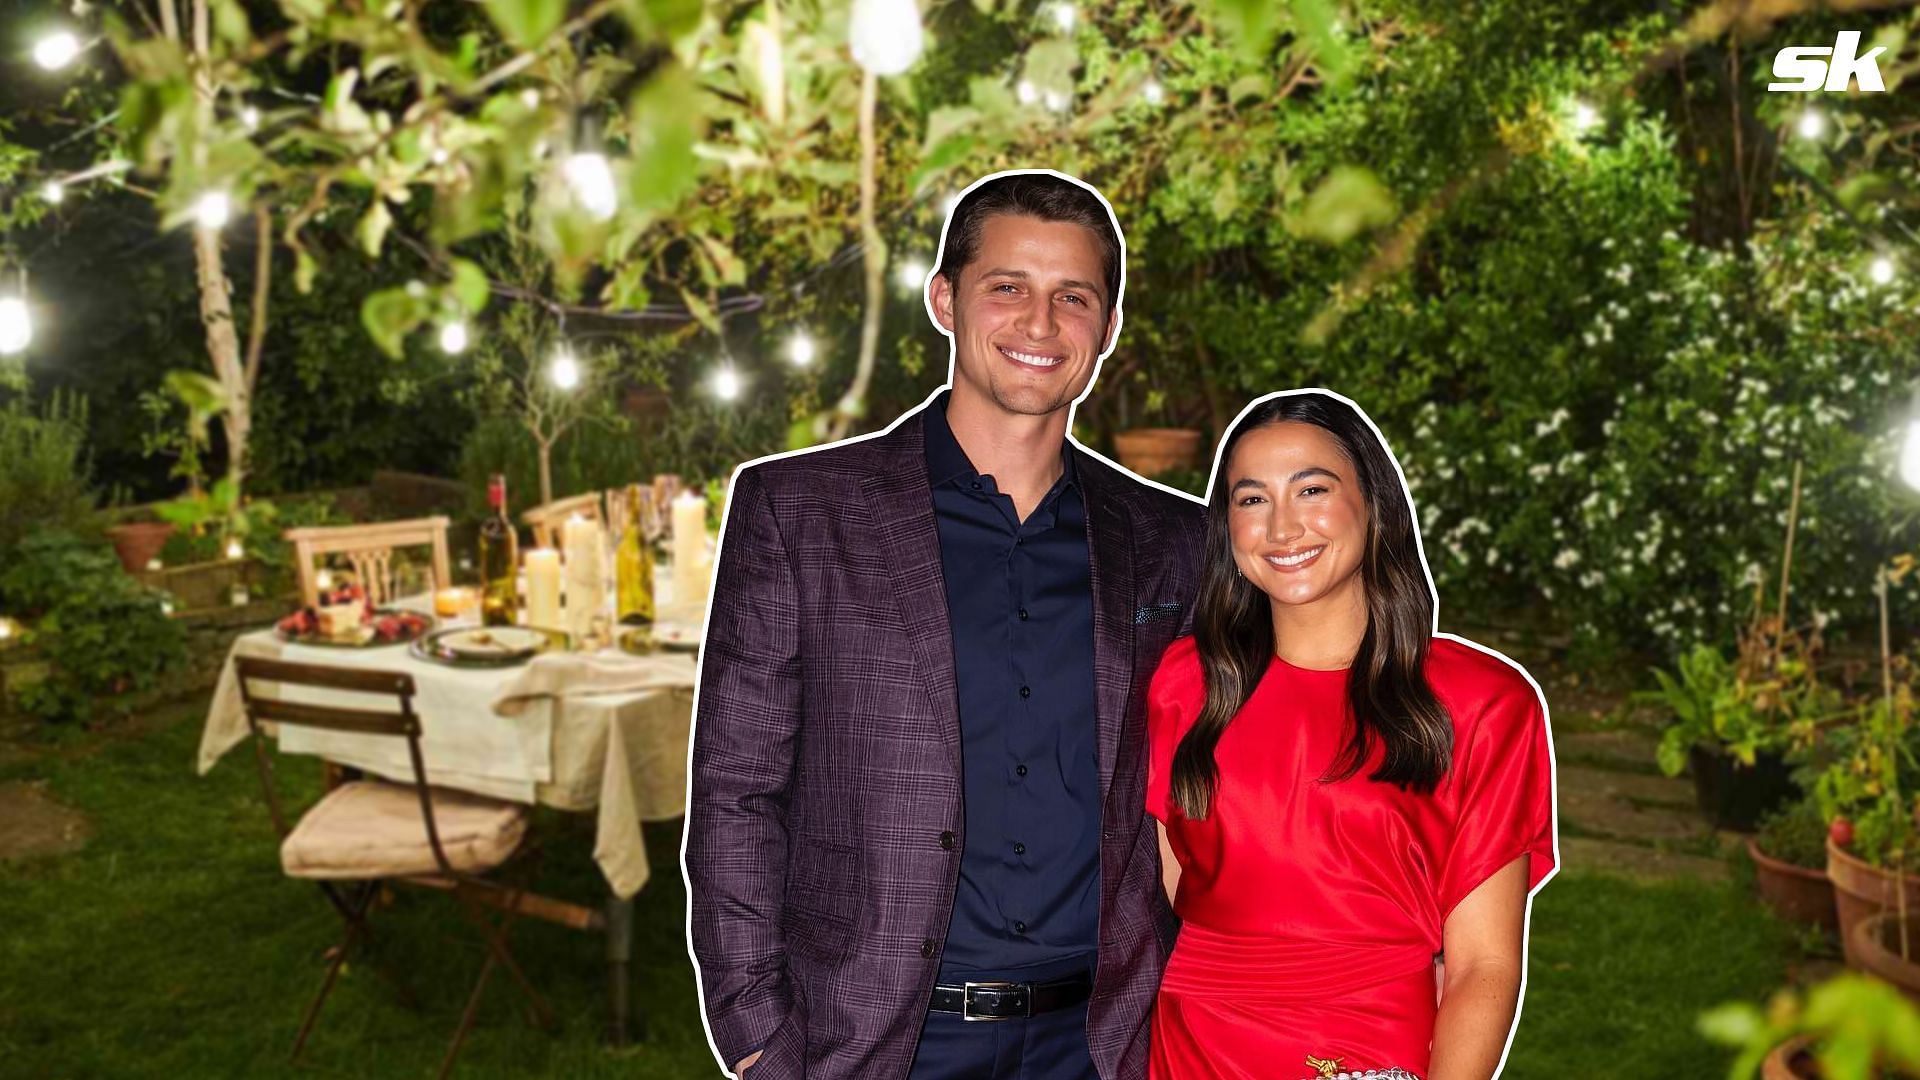 World Series MVP Corey Seager and wife Madisyn bring style to Rangers awards dinner in Dallas amid jam-packed weekend celebrations